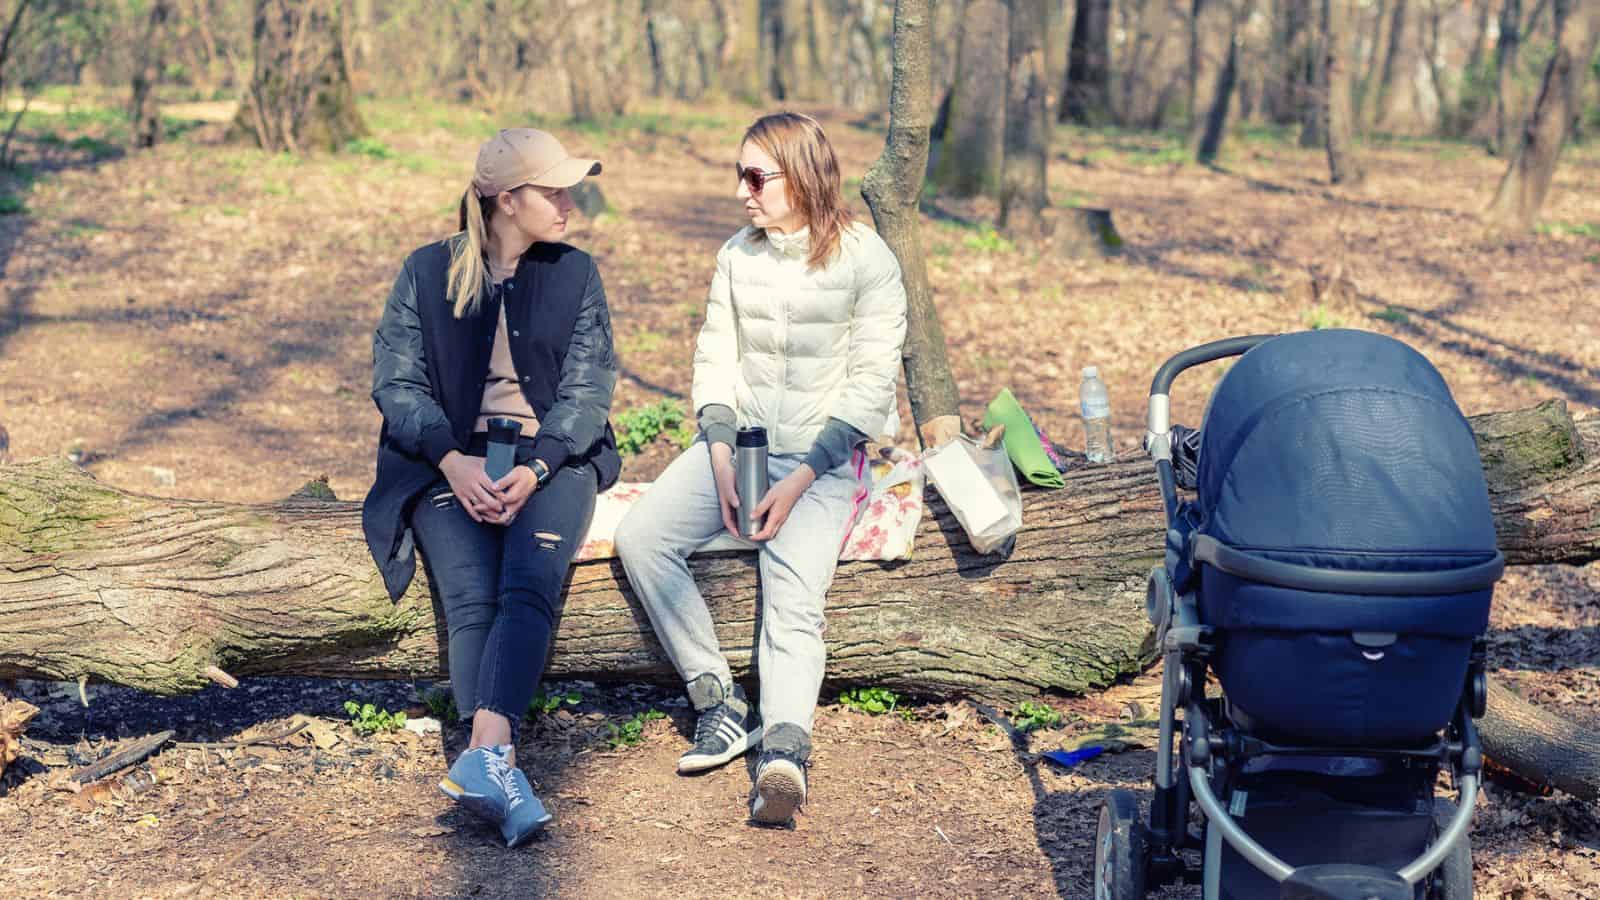 two women sitting on a lot talking next to a baby stroller